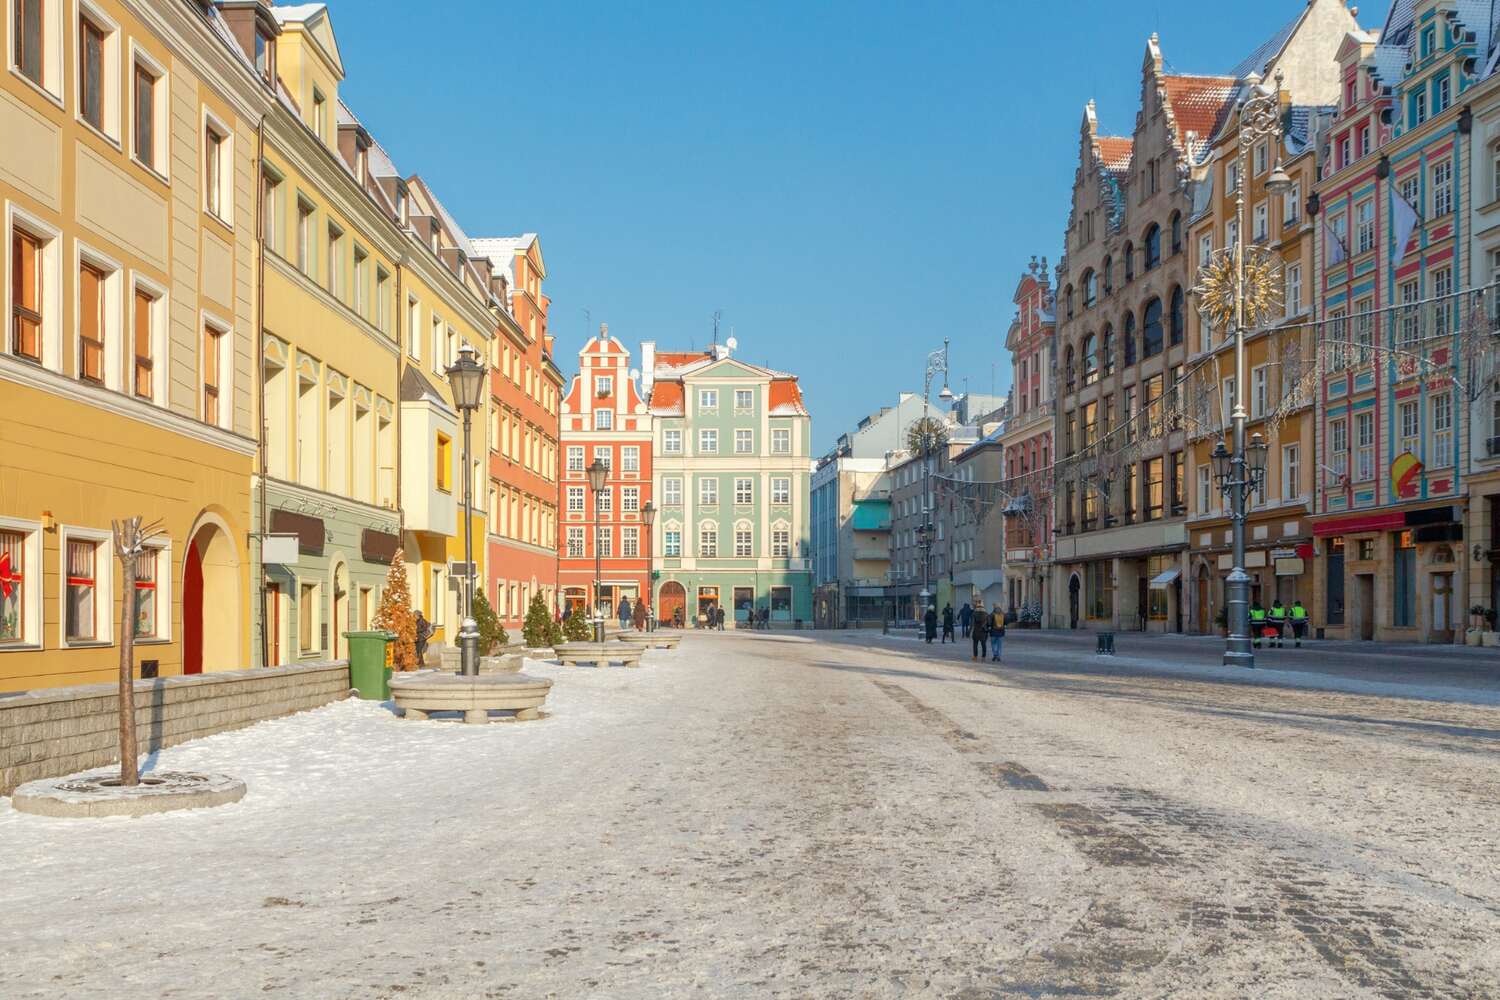 48-hours-in-Wroclaw, Polish streets in the winter with colorful buildings and blue sky